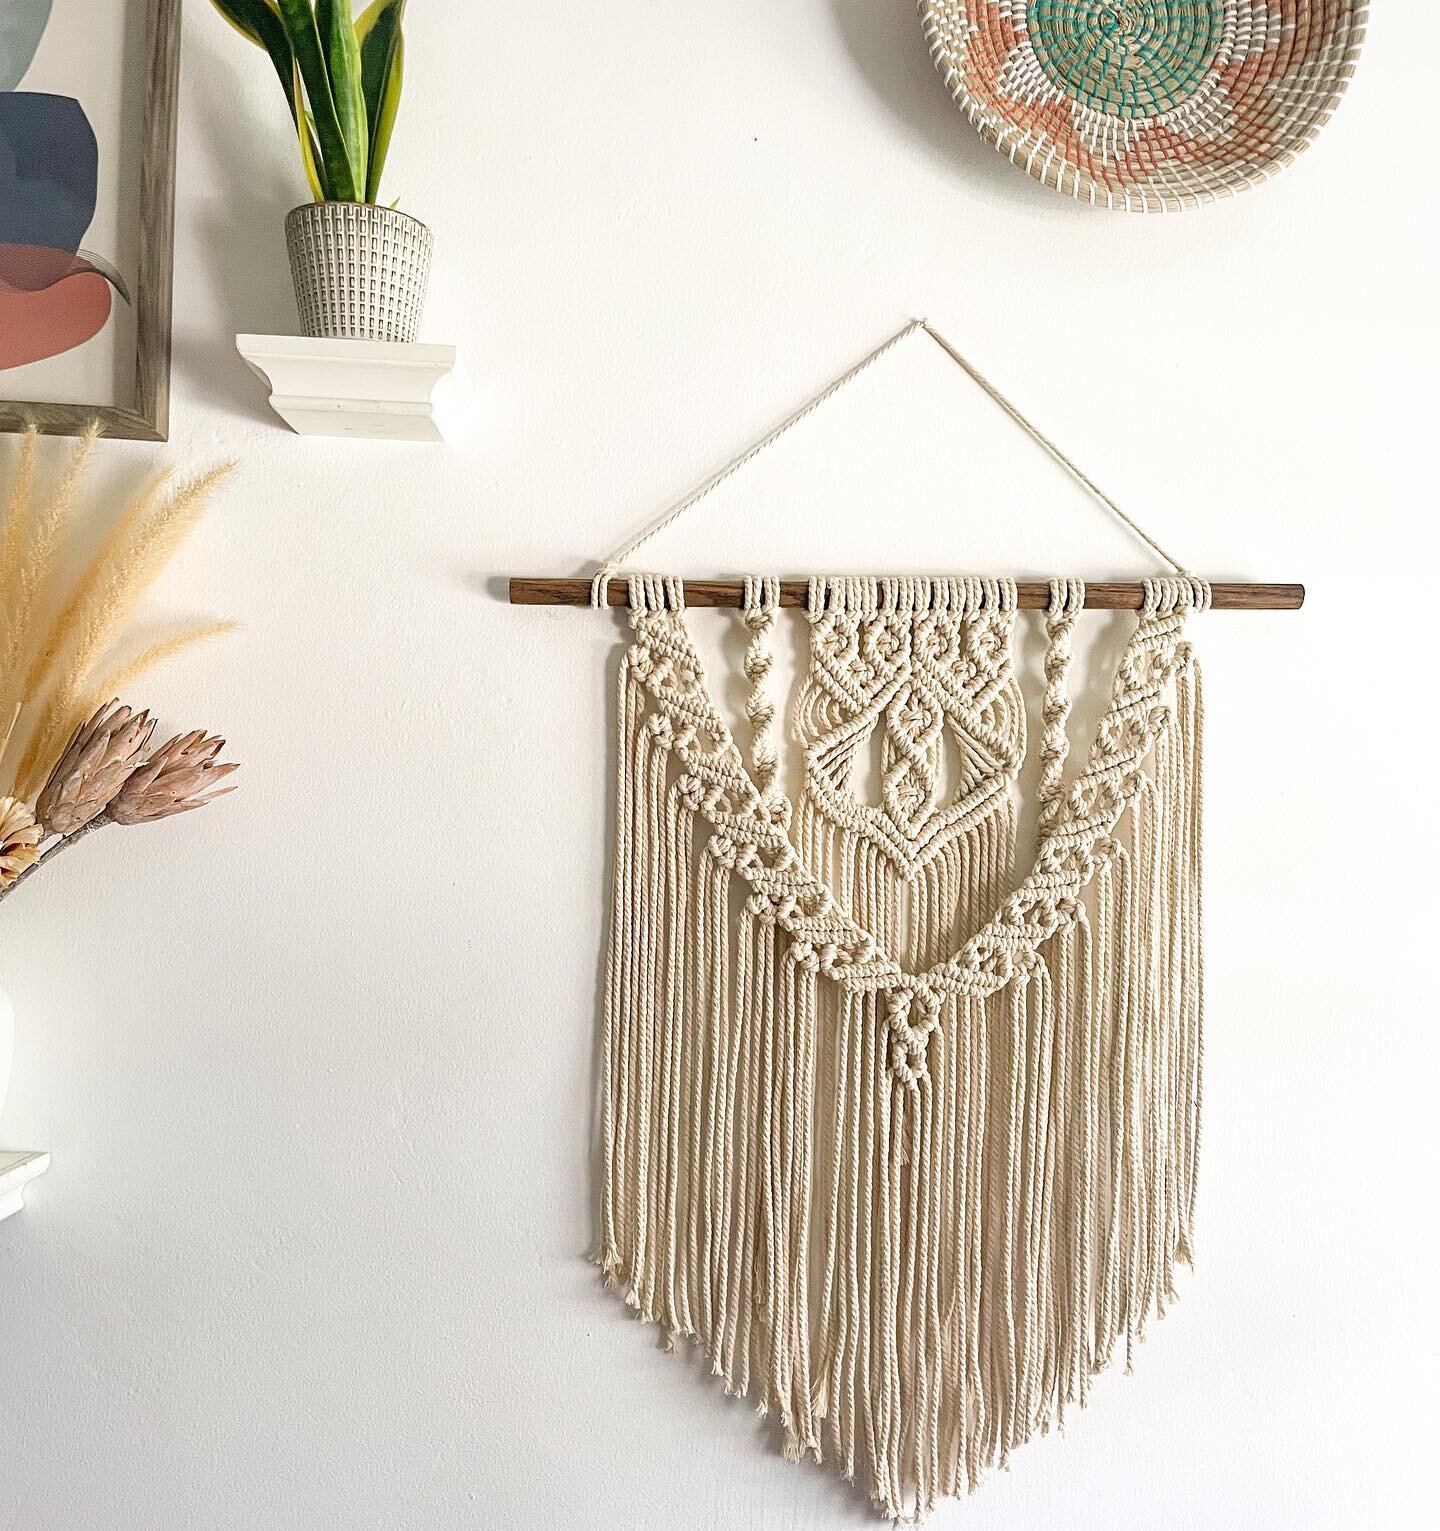 Another gem from the All Seeing Eye collection. This medium size wall hanging is the perfect boho accent piece for your home. Get yours today - Link in bio!

#macrame #macramewallhanging #macramecommunity #macramemaker #macramelove #macrameartist #ma